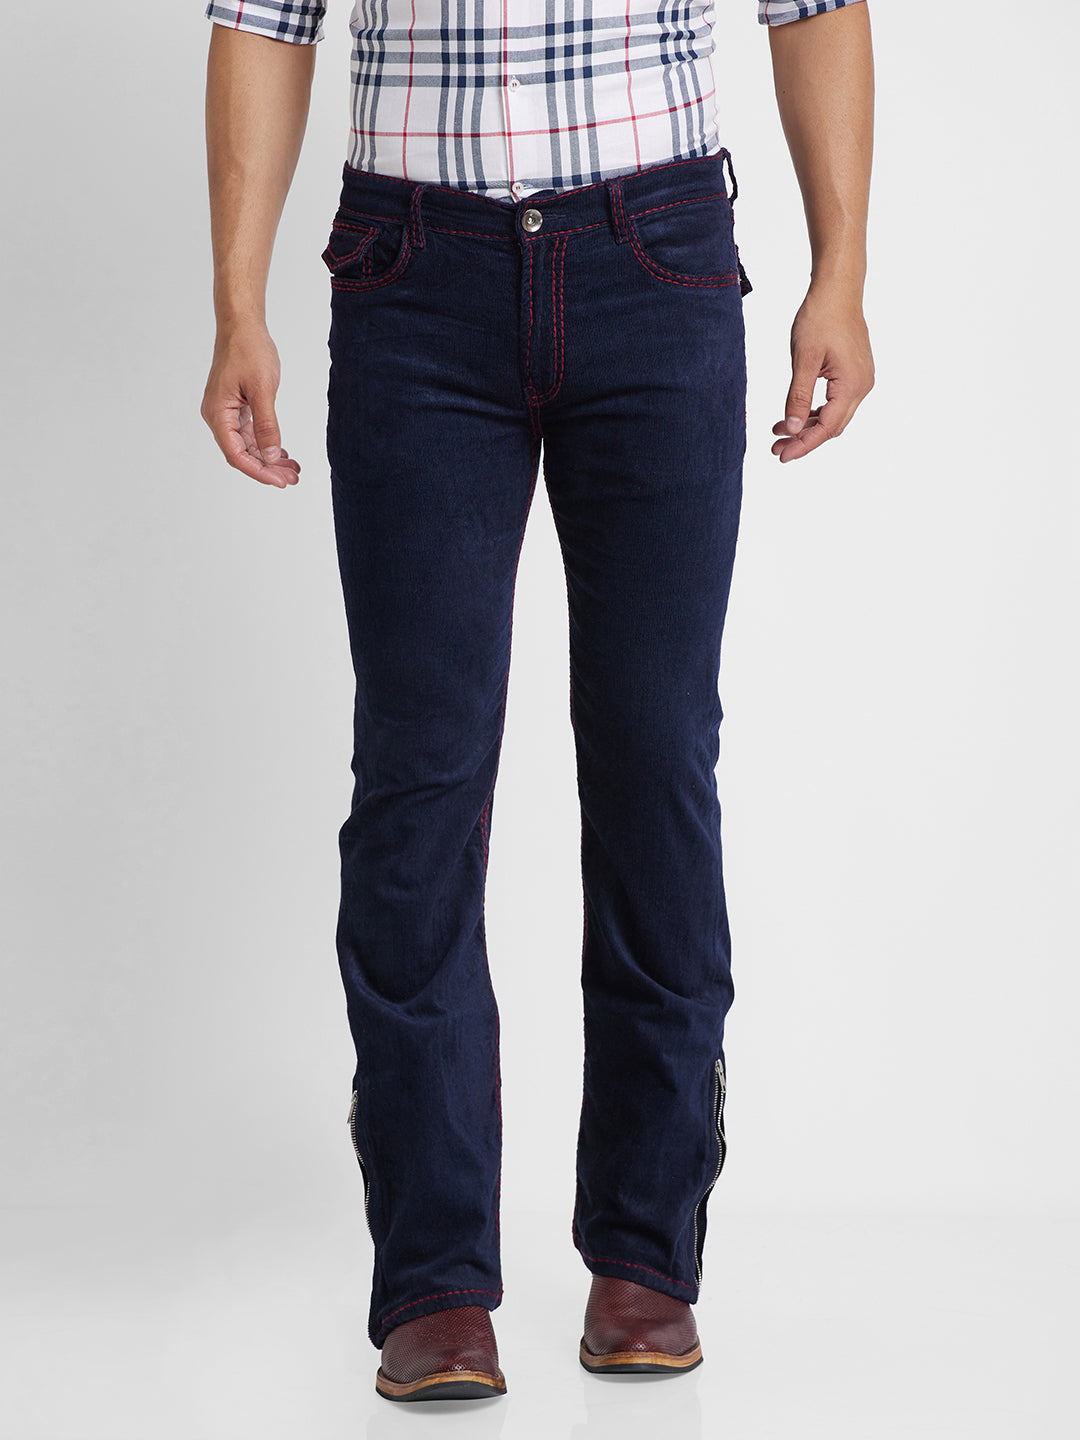 Navy Blue Bootcut Corduroy With Maroon Saddle Stitch And Bottom Zipper